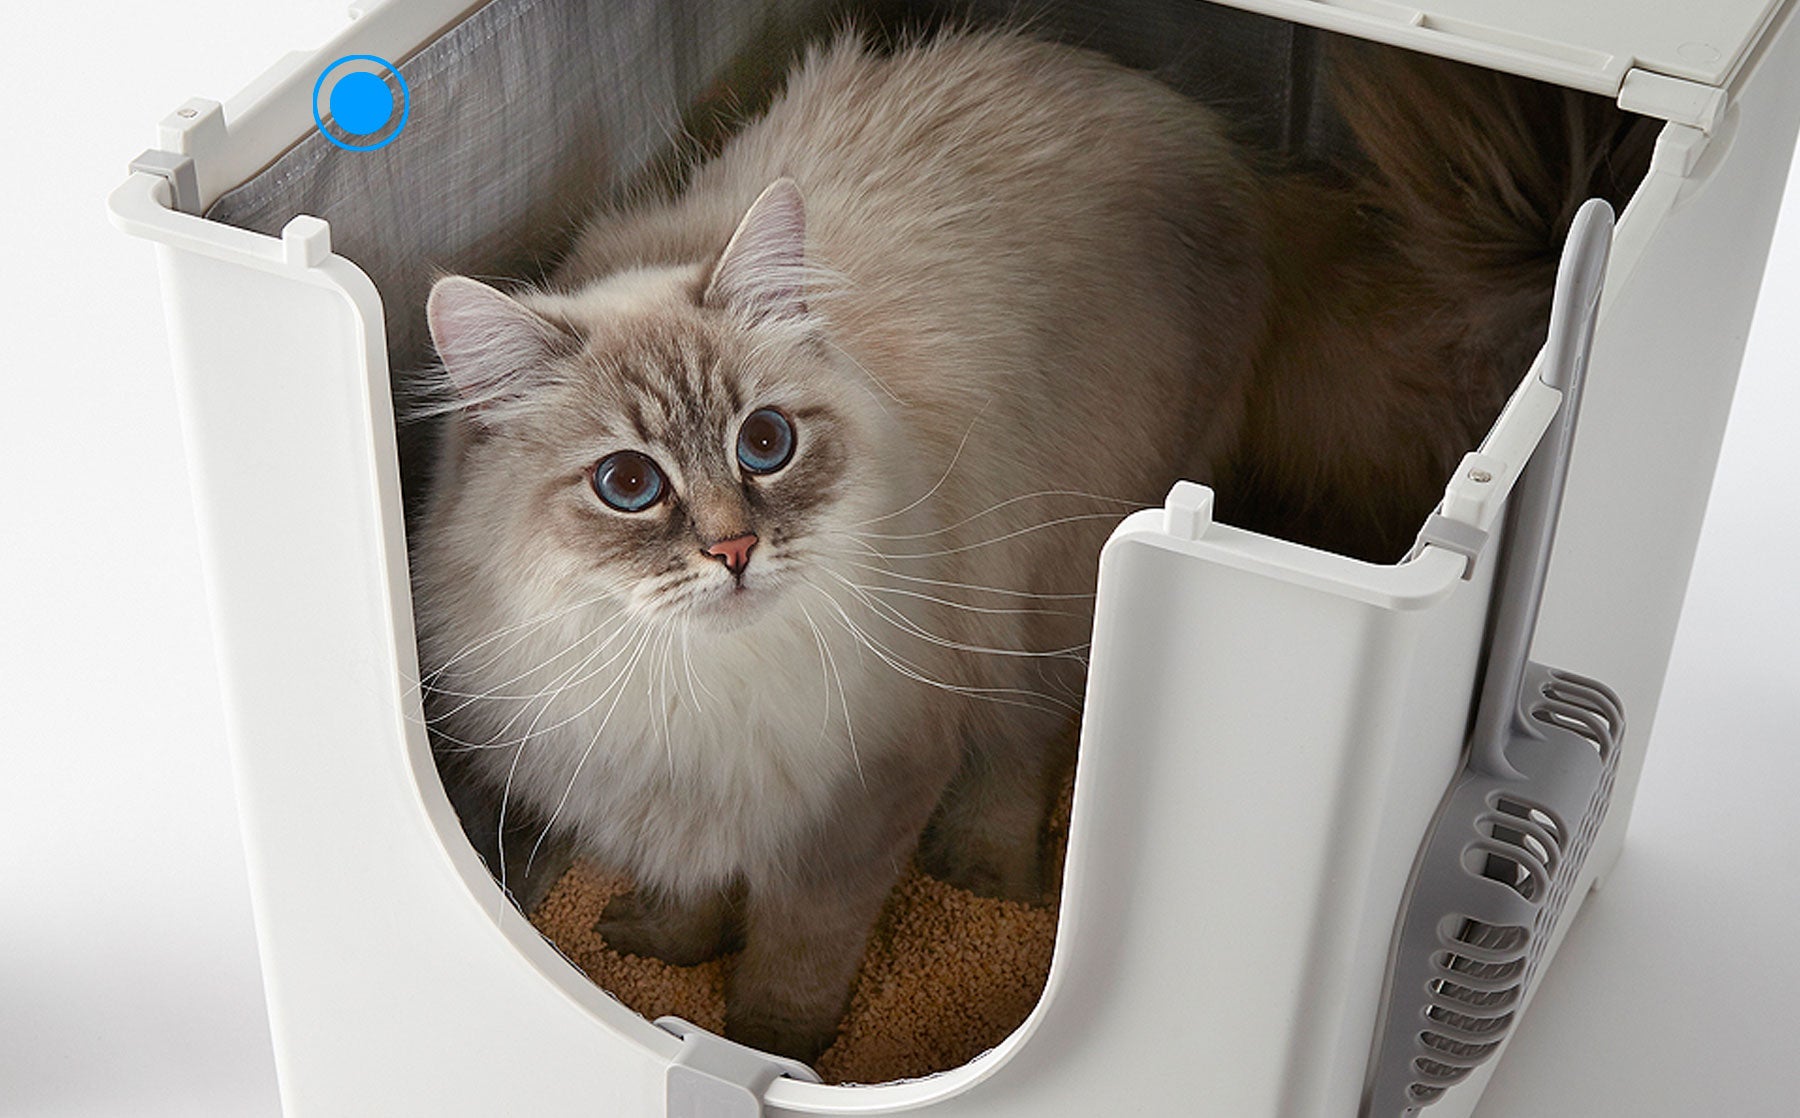 Why use Modkat's reusable cat litter liners?